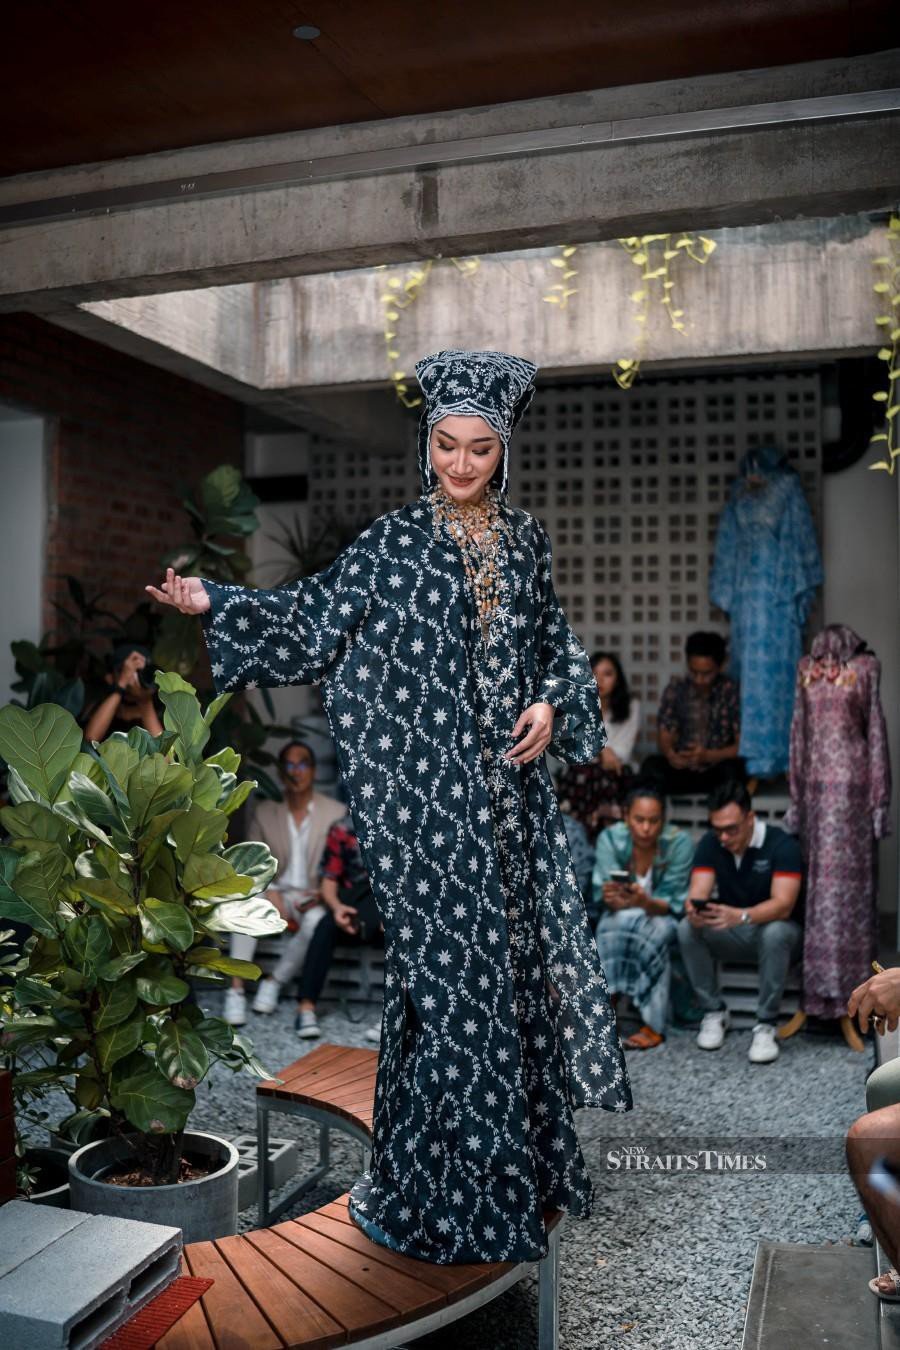  Fashion show featuring traditional Bornean textiles will be held tonight.